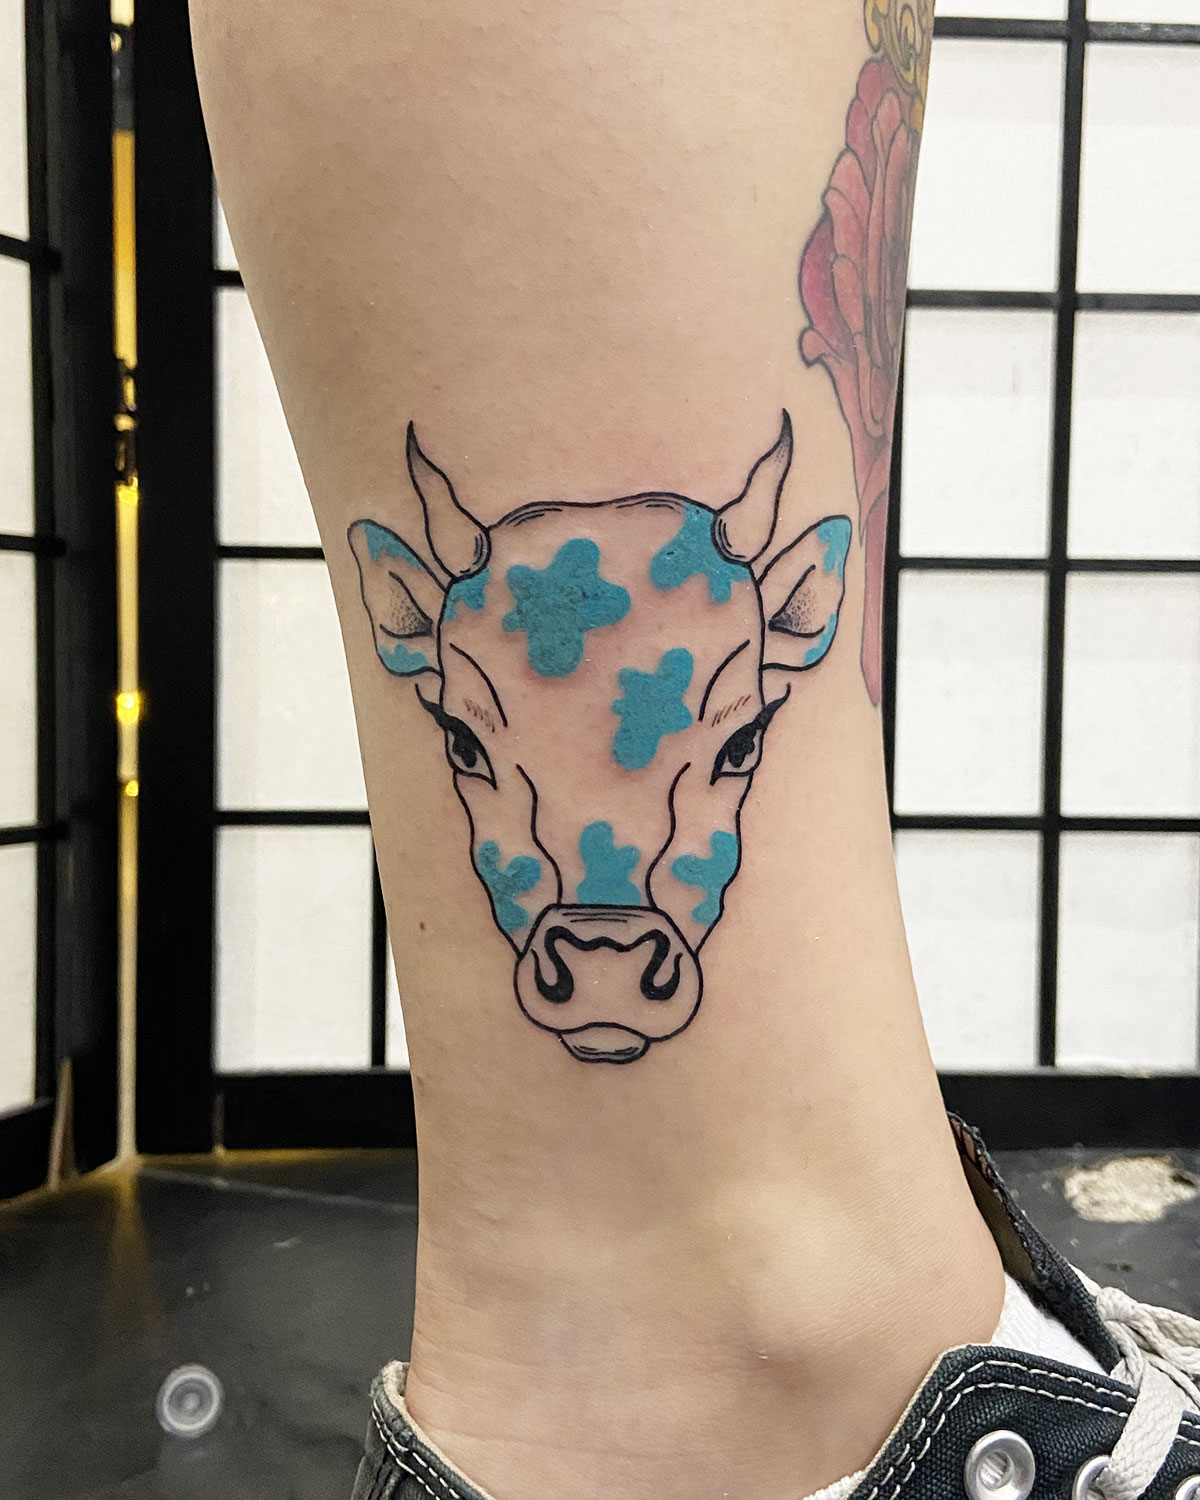 50 Cow Tattoo Designs For Men  Cattle Ink Ideas